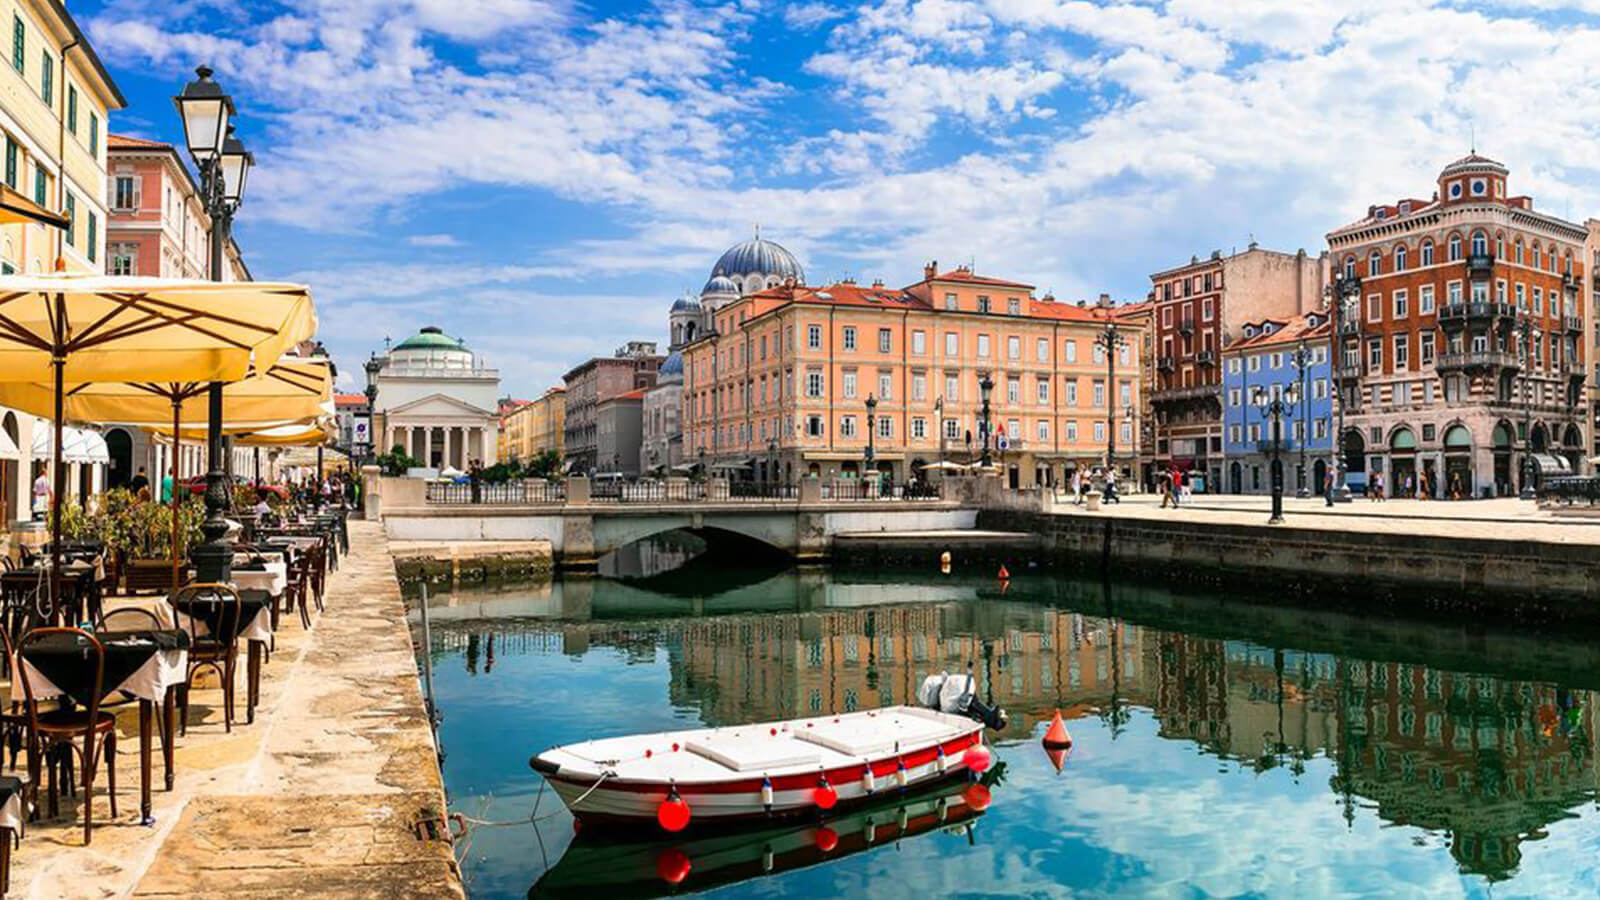 Image of Trieste, Italy